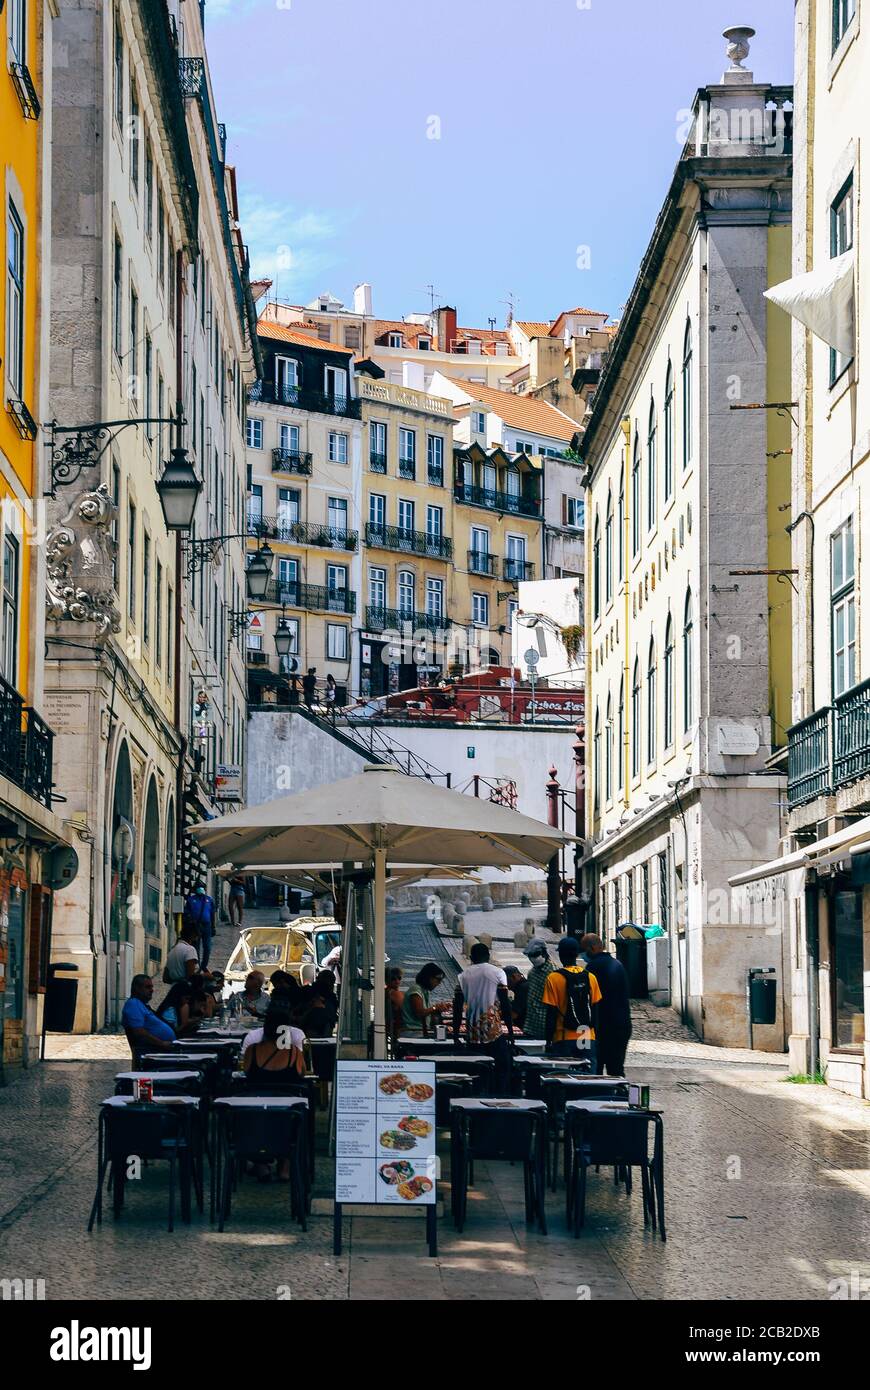 Cafe and restaurant in busy historic center Baixa District. Perspective street view of shops and cafes in traditional old buildings Stock Photo